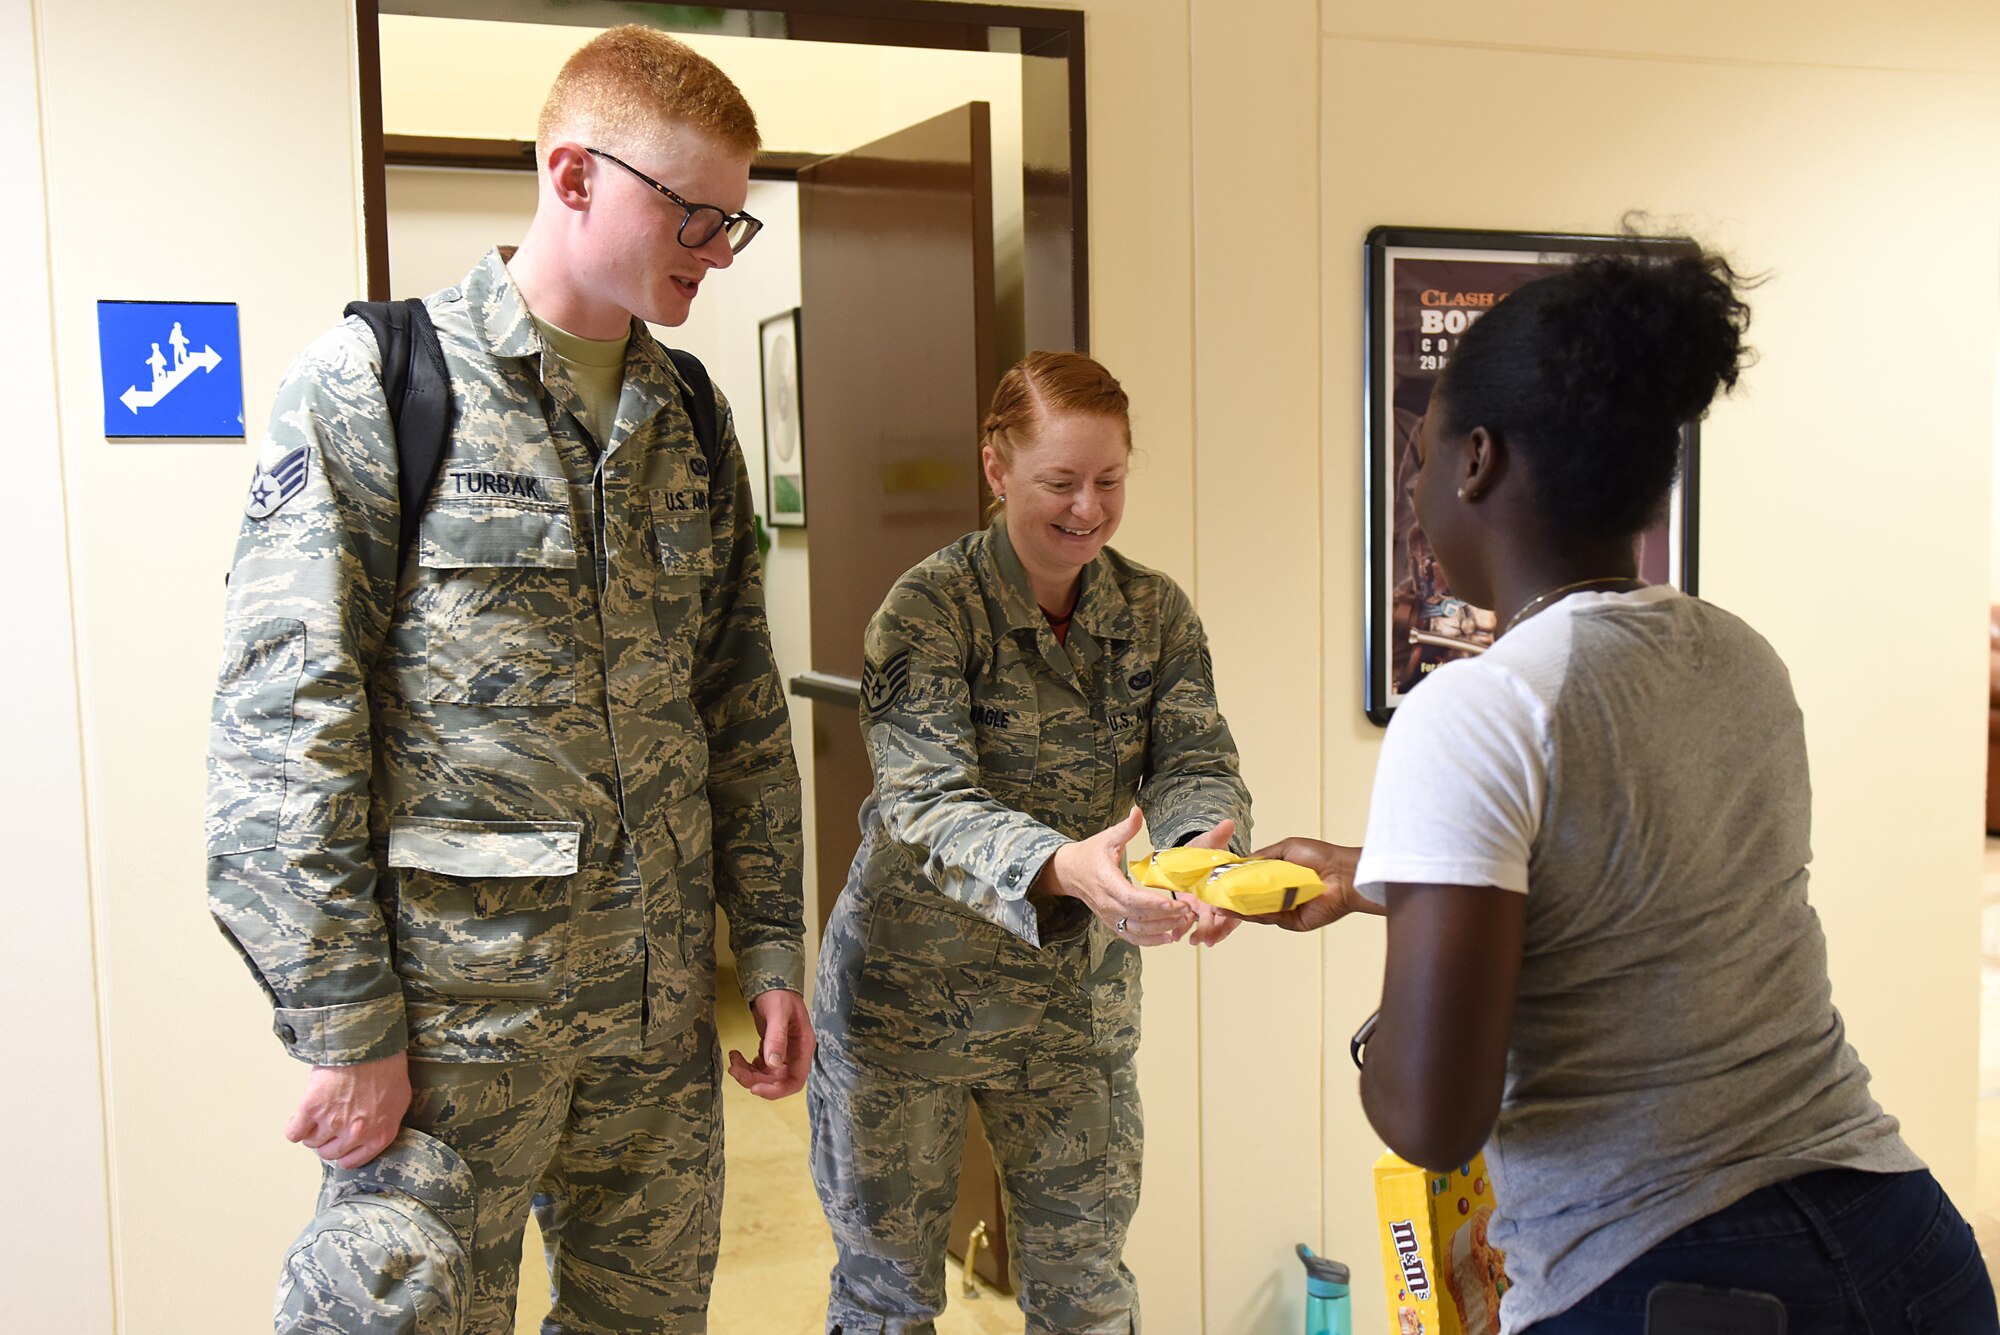 U.S. Air Force Airman 1st Class Valtrice Sullivan, 39th Security Forces Squadron contingency deployer and USO volunteer, hands out ice cream to Airmen at Incirlik Air Base, Turkey, July 13, 2018.